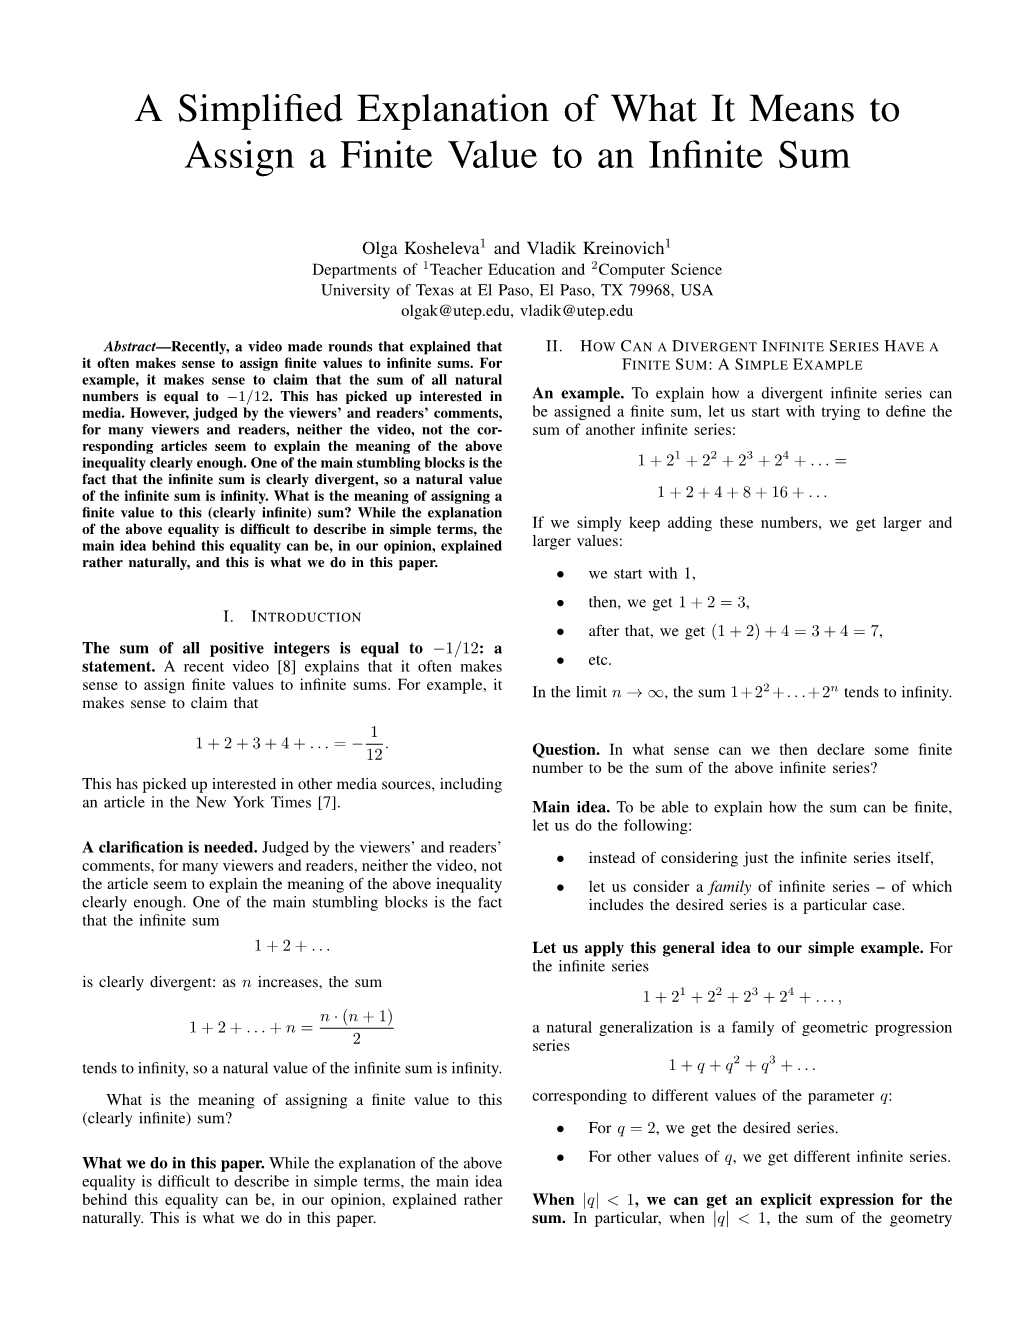 A Simplified Explanation of What It Means to Assign a Finite Value To